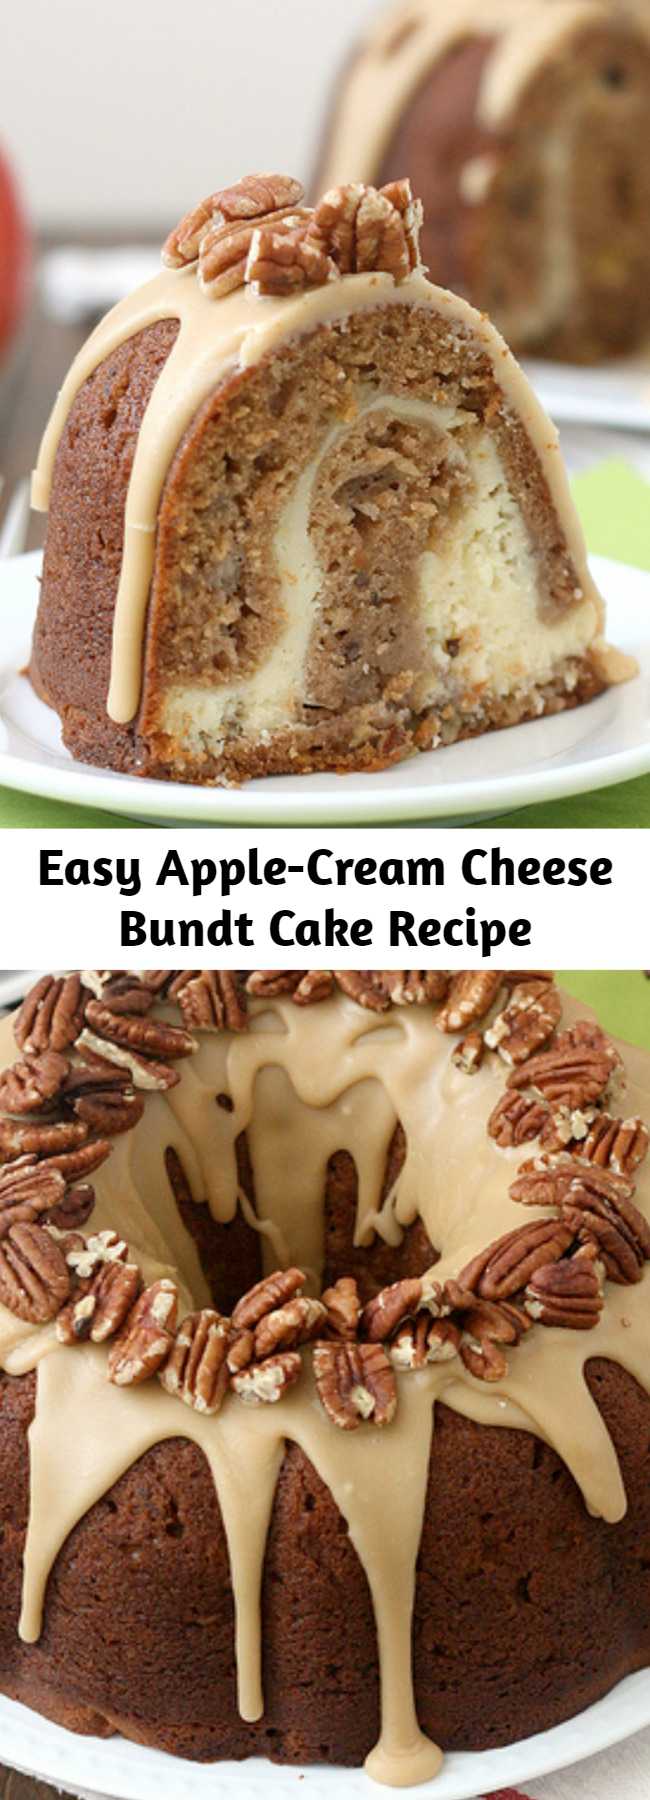 Easy Apple-Cream Cheese Bundt Cake Recipe - This bundt was the perfect dessert to kick off apple season; I could not get enough! In addition to diced apples interspersed throughout the cake, there's also applesauce in the batter for double the apple goodness. The thick pocket of cream cheese in the center is to die for, but my favorite was the sweet praline frosting on top of the cake. Dig in for dessert, or enjoy a slice for breakfast - you can't go wrong either way.